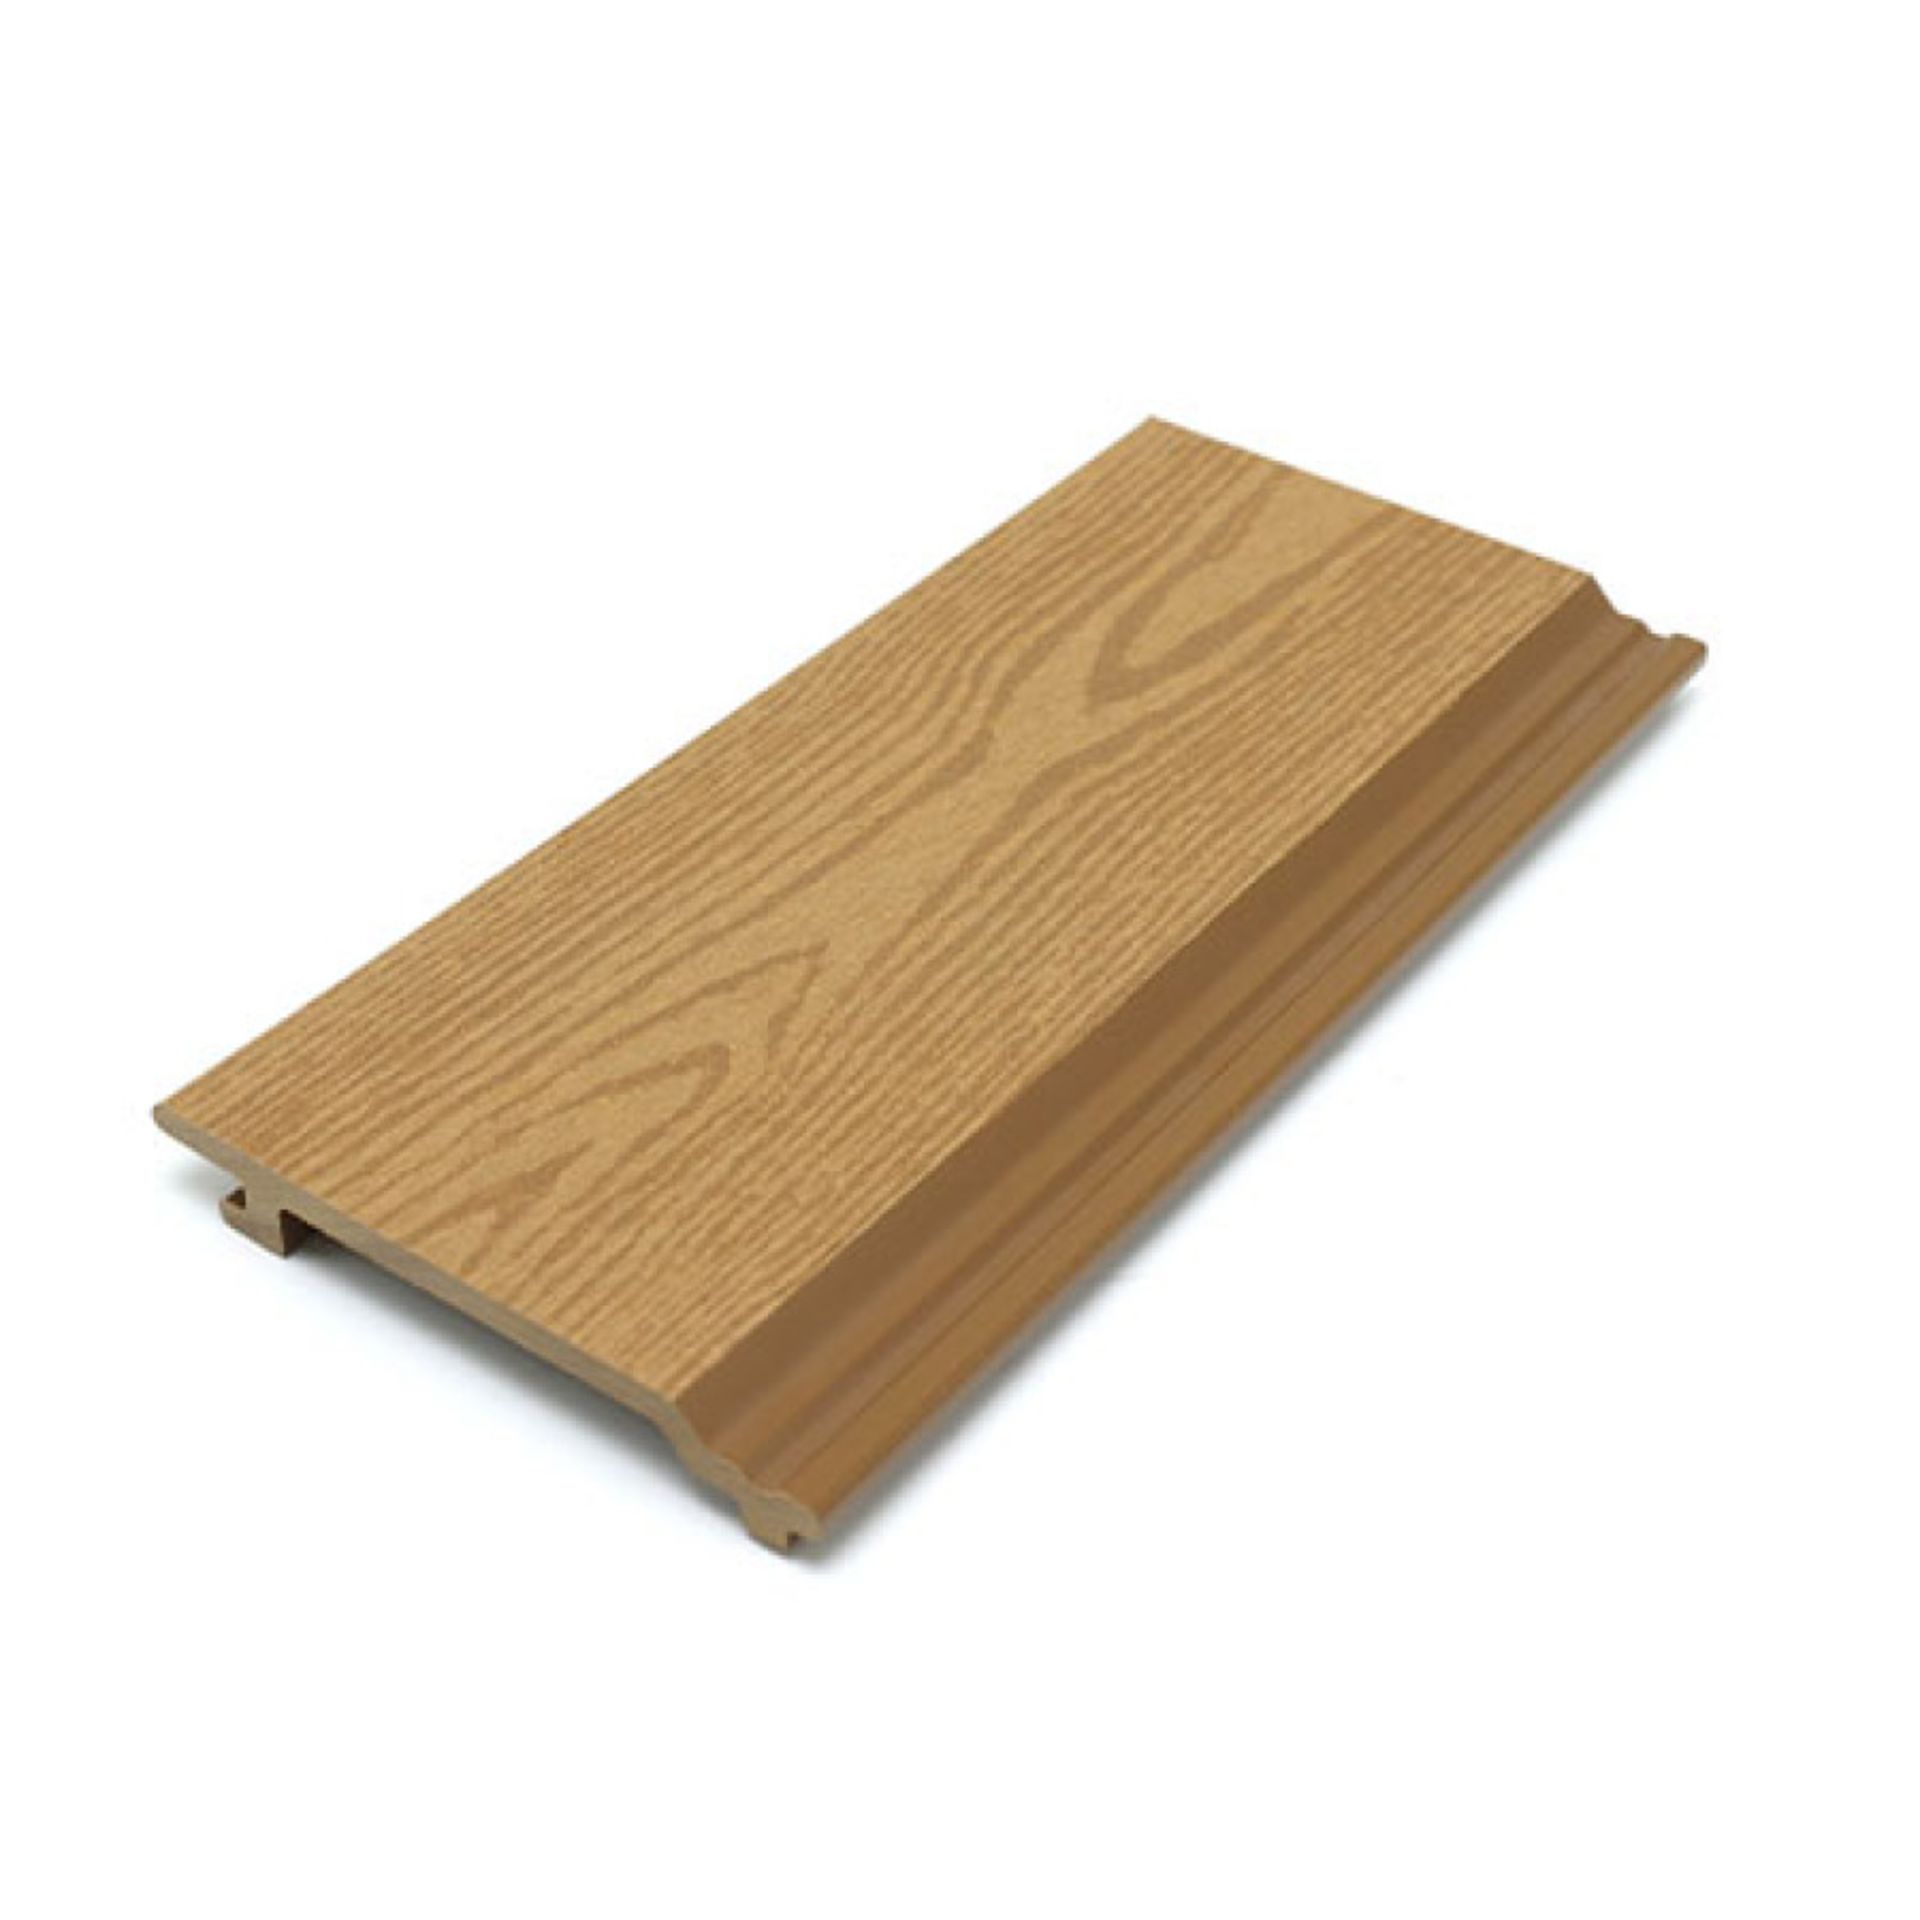 9sqm of Composite Cladding ( 24 boards x 3m x 148mm x 21mm ) Teak - Image 2 of 2